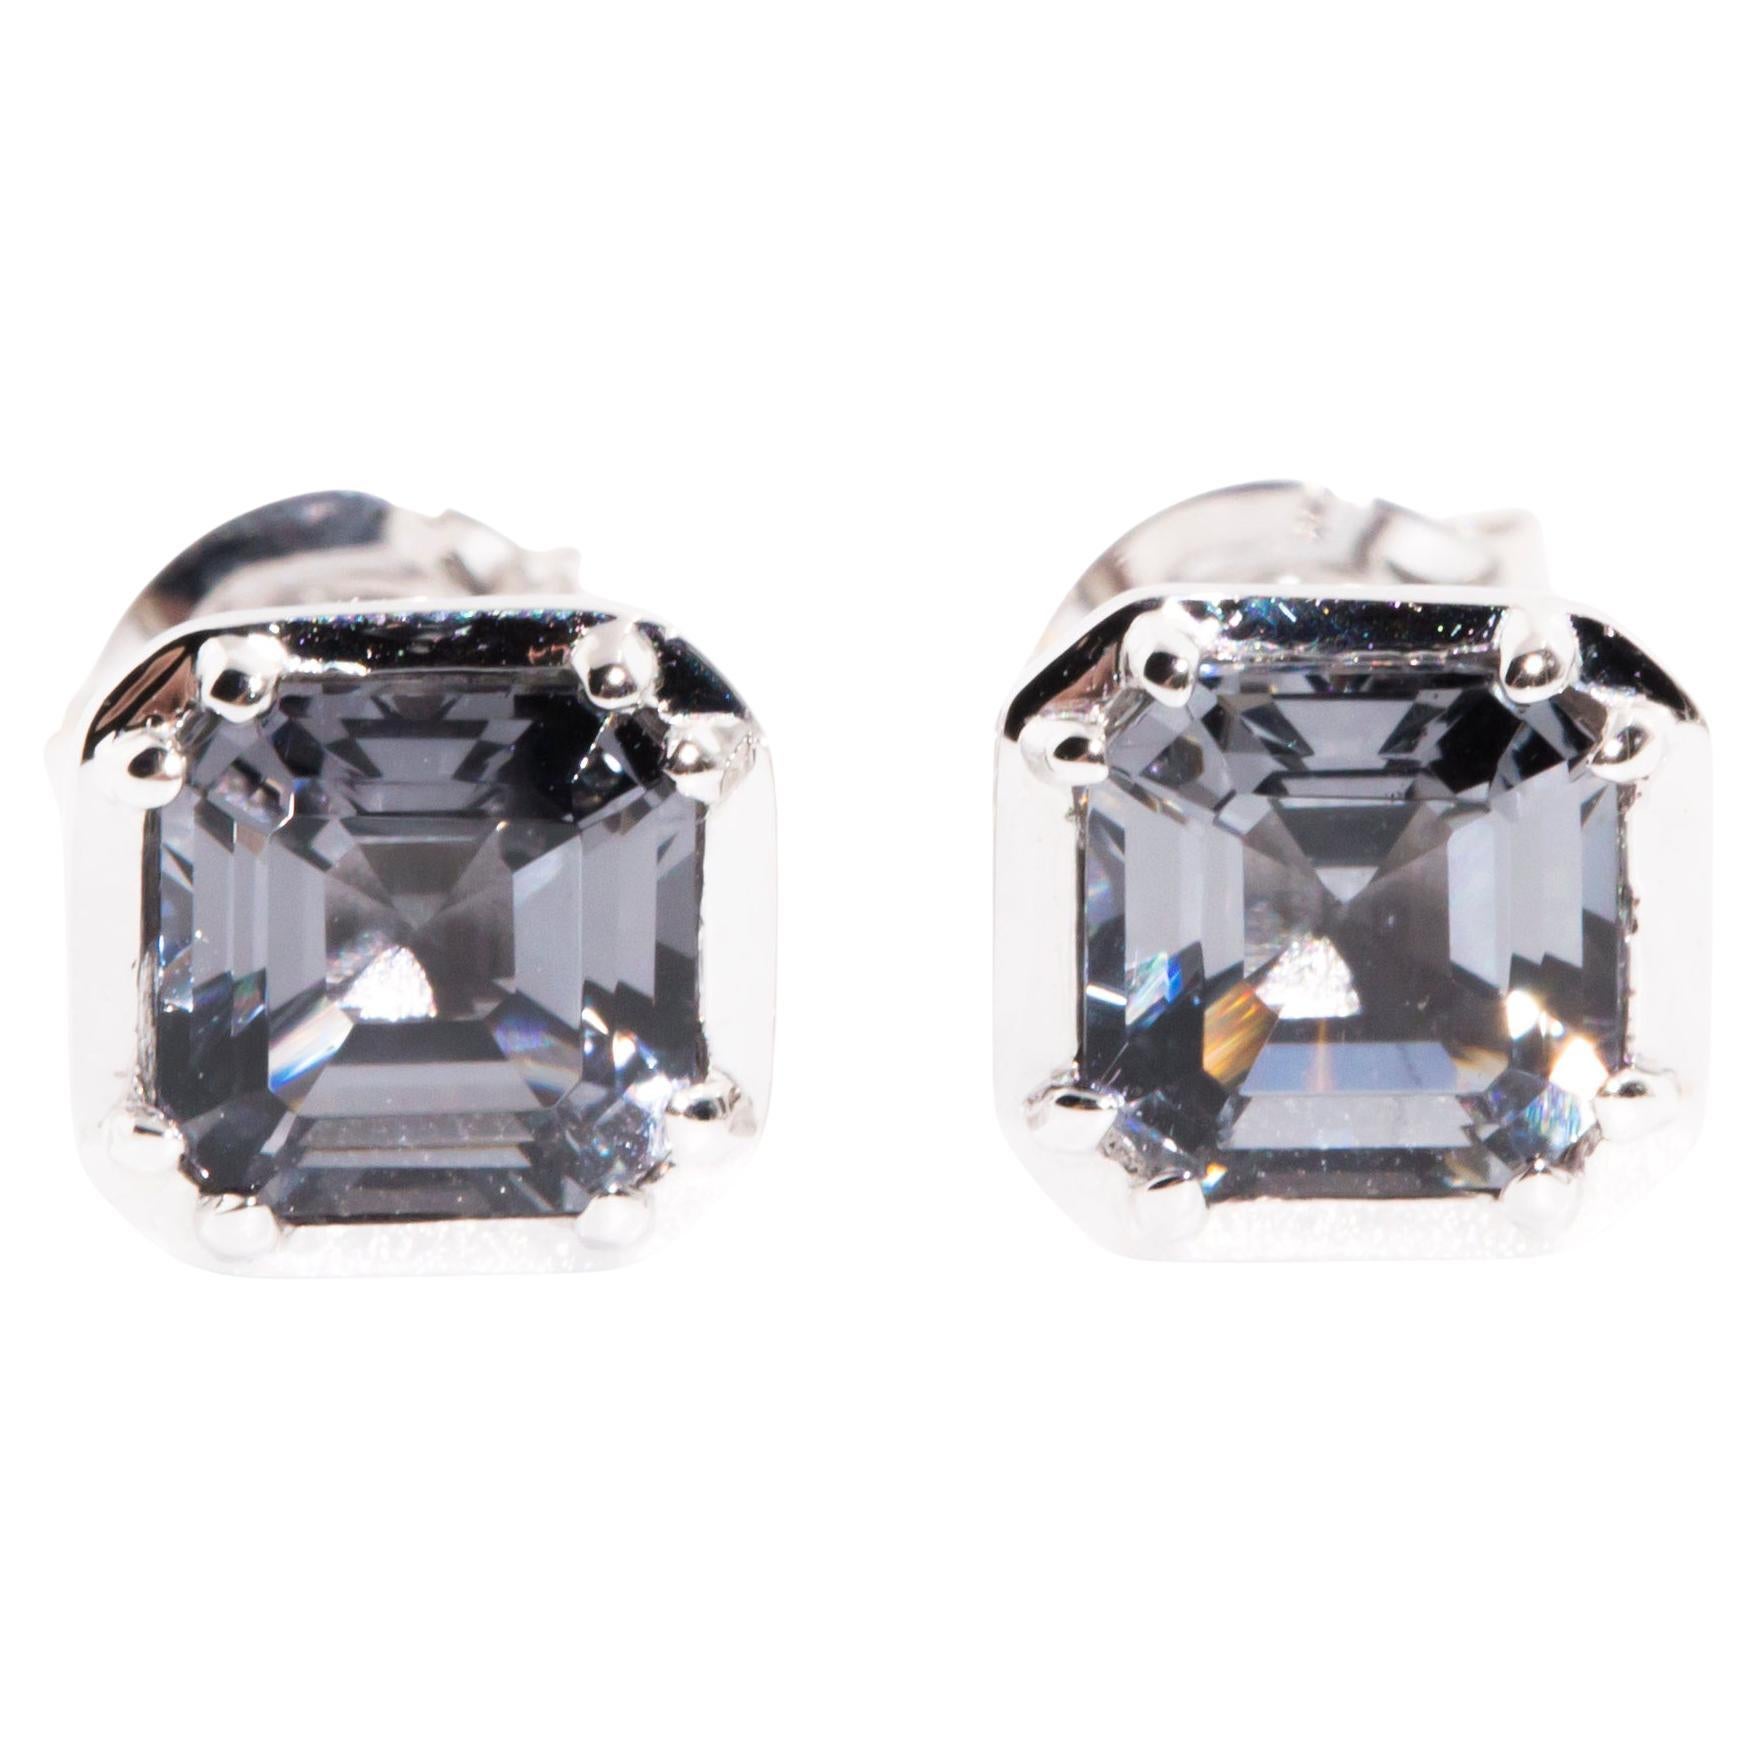 Blue Grey Spinel Contemporary Stud Style Earrings in 9 Carat White Gold